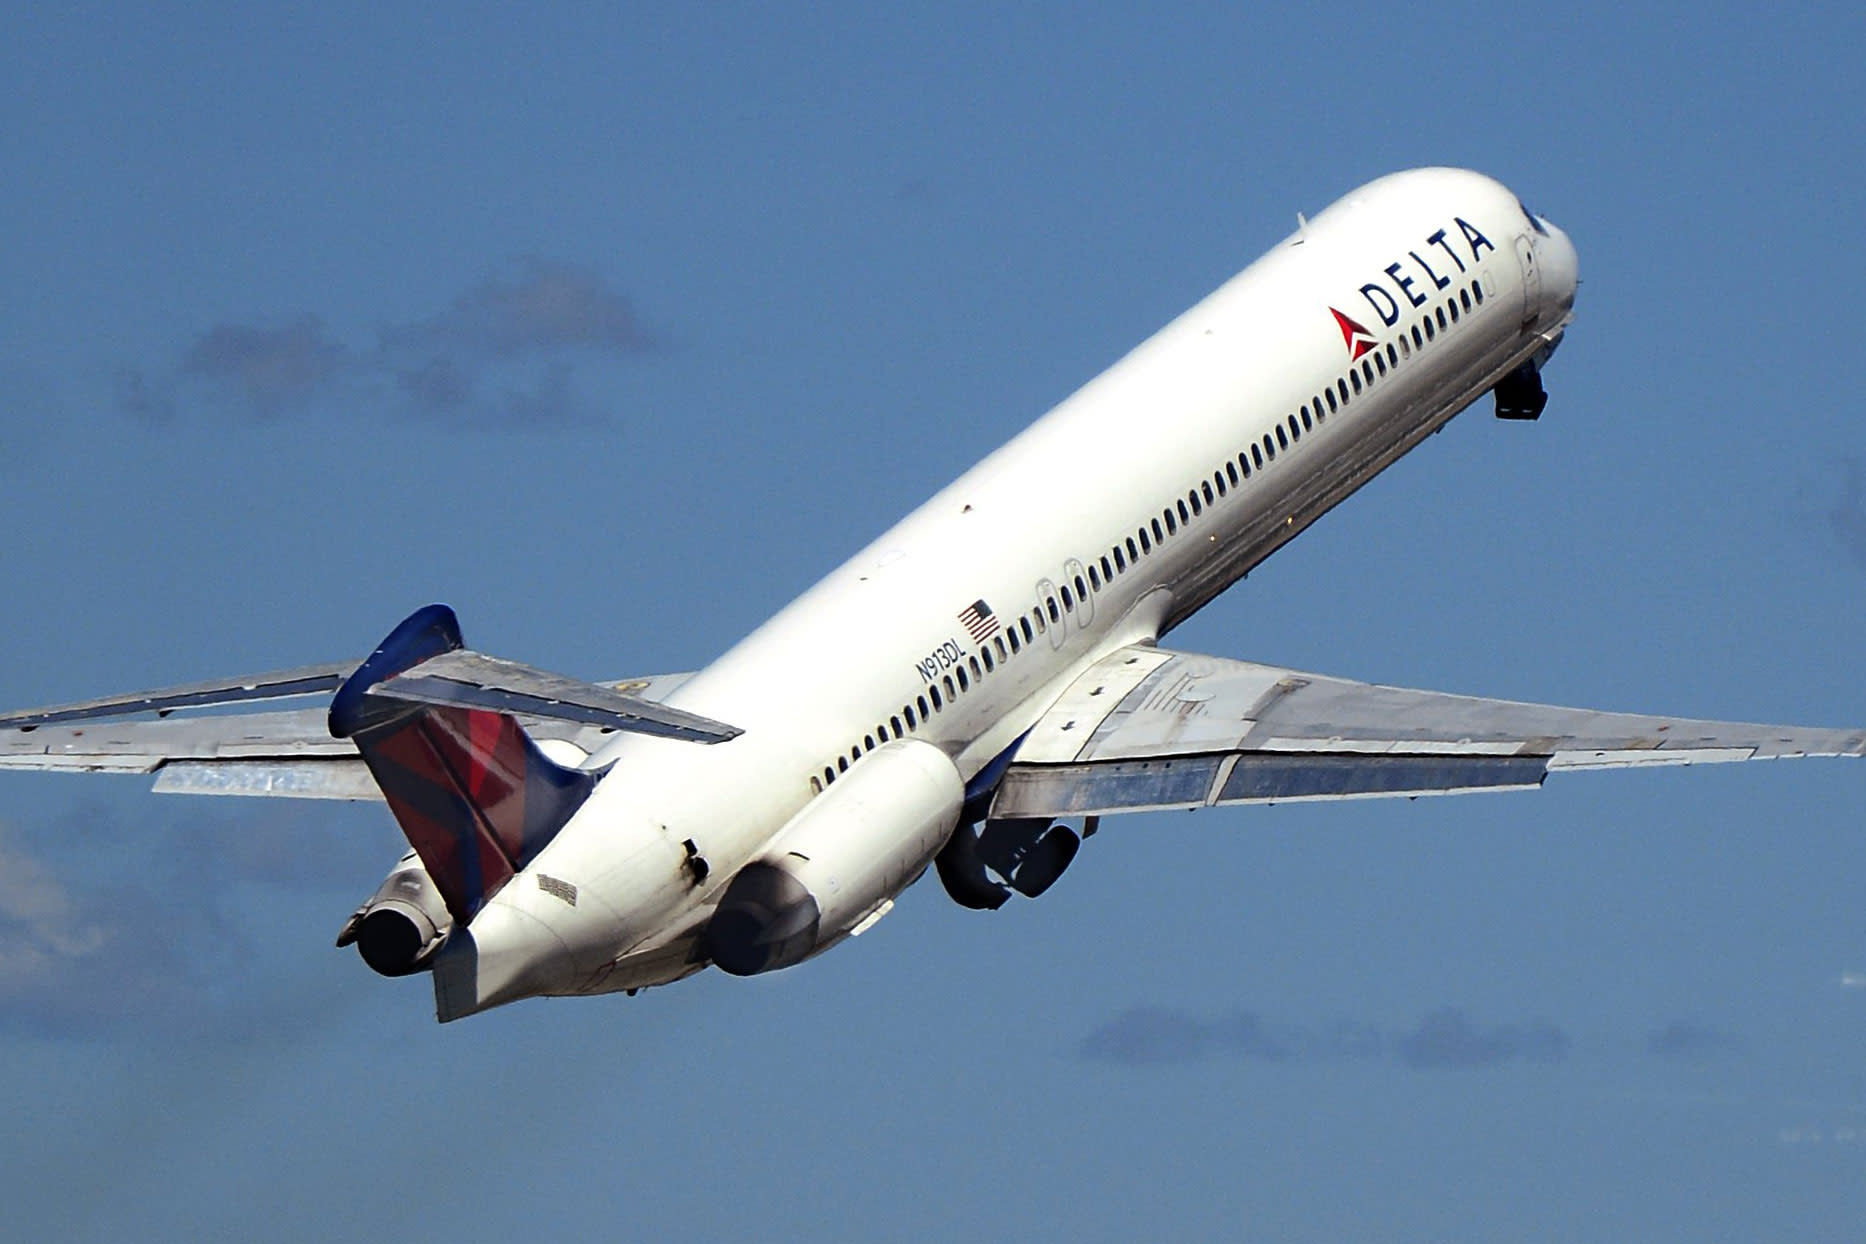 Delta Retires Md 88 And Md 90 Jets Early Because Of The Coronavirus